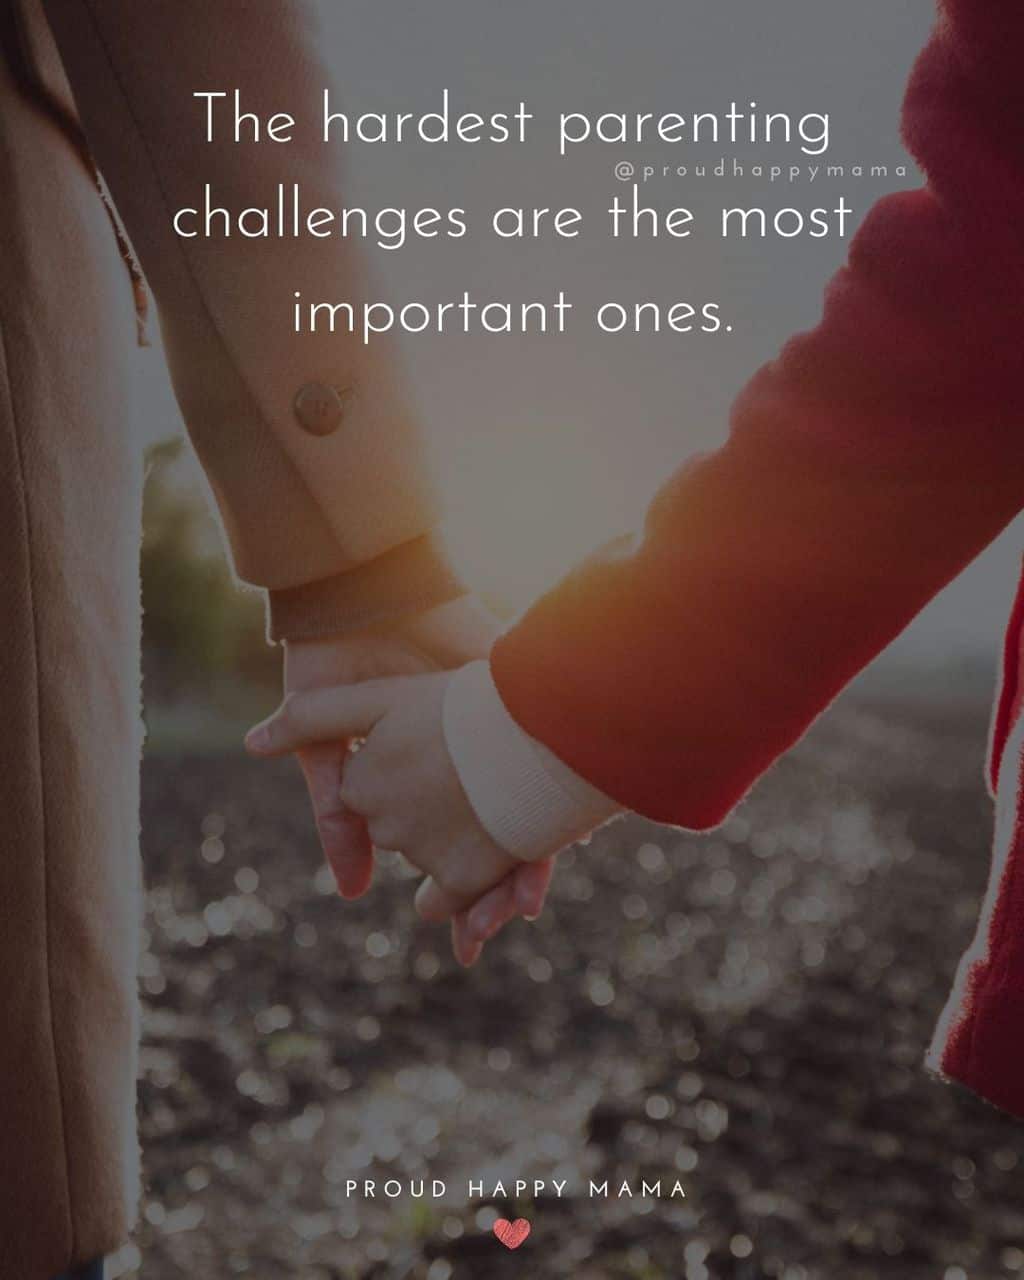 Parenting Quotes - The hardest parenting challenges are the most important ones.’